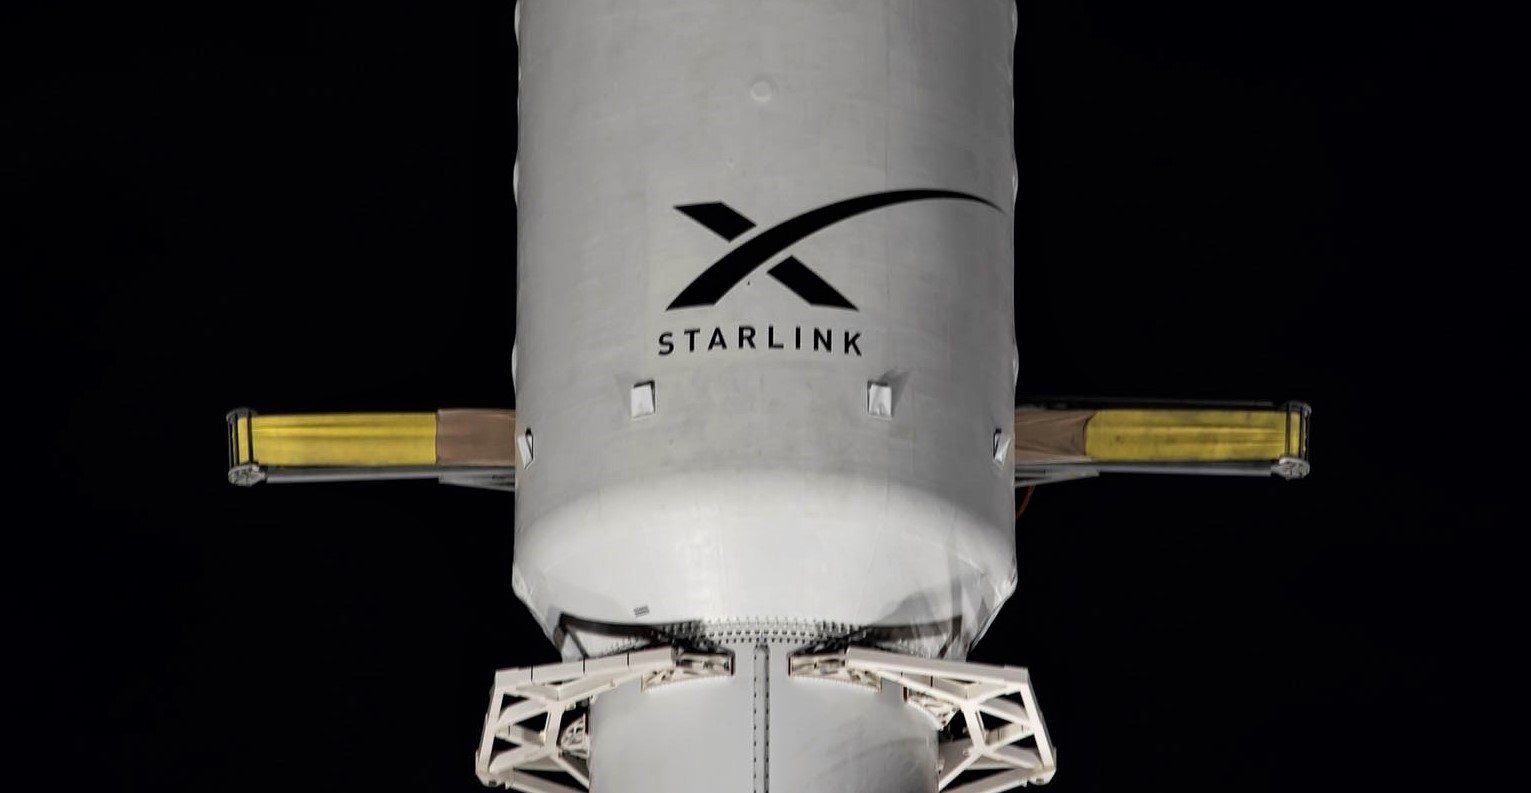 Starlink made $1.4B in income in 2022, SpaceX thinks it could actually do higher